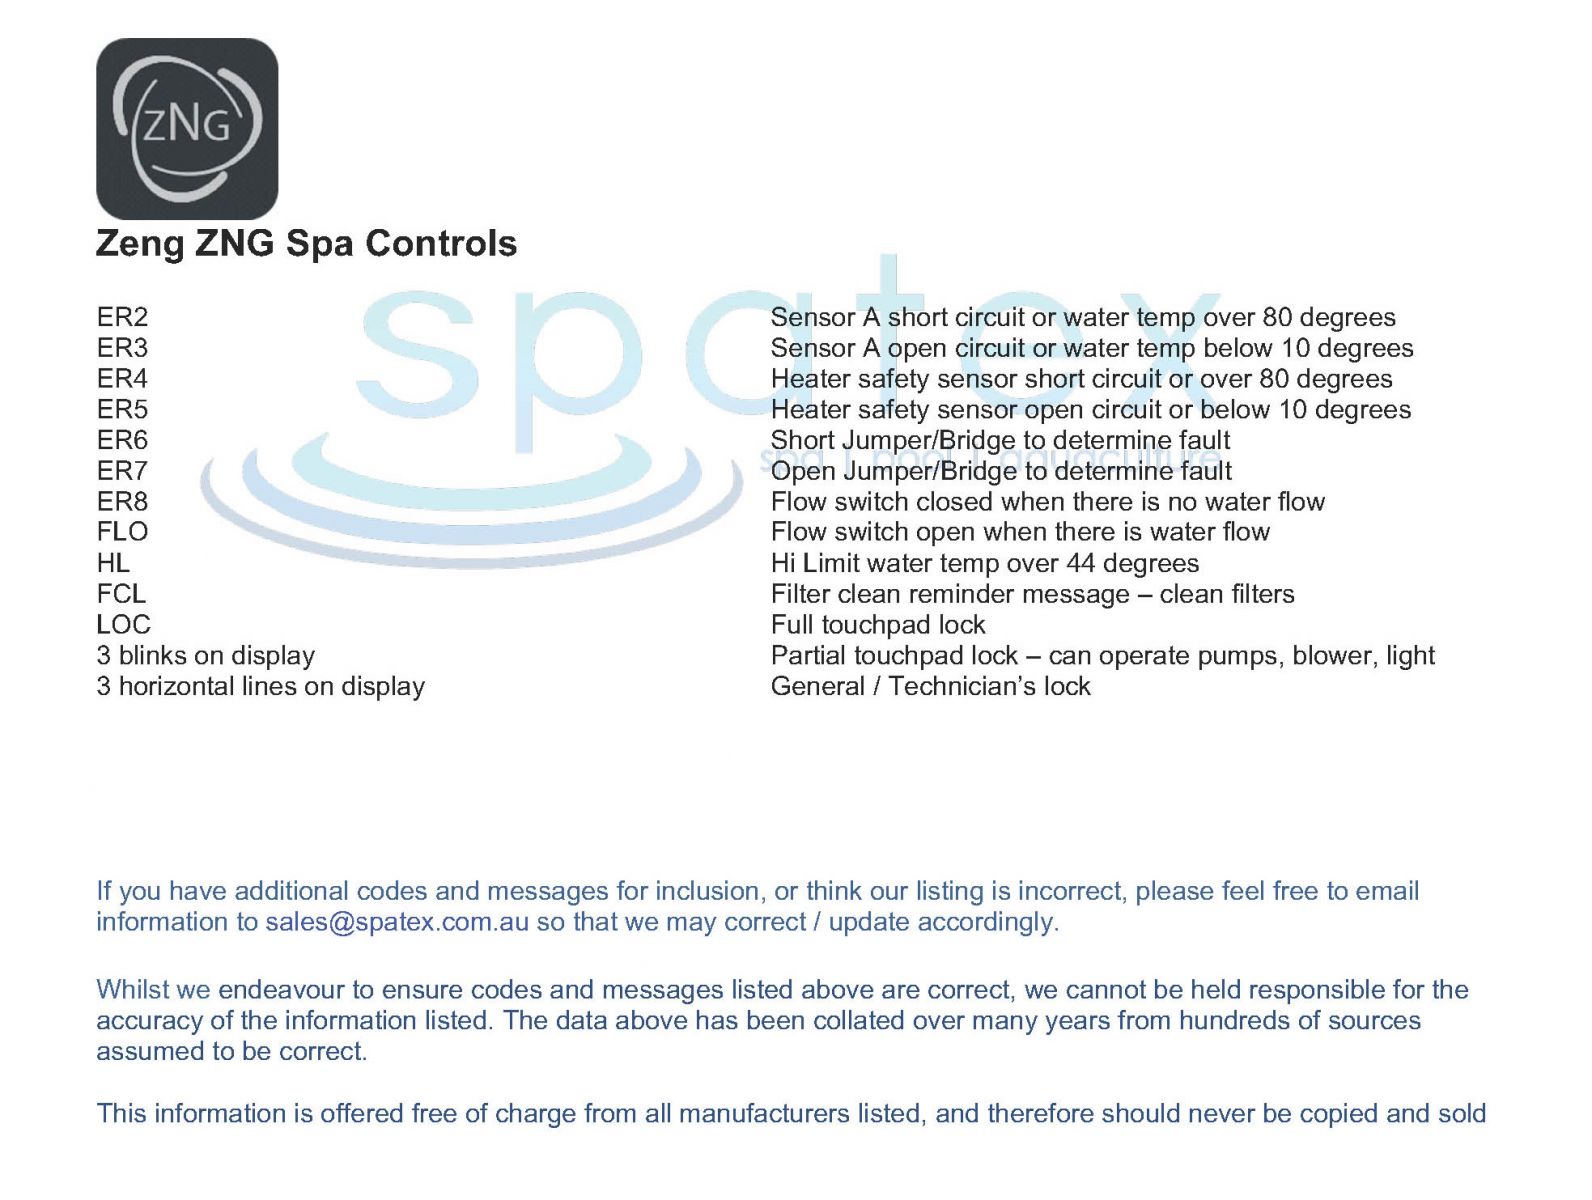 Zeng ZNG spa control fault error codes and messages